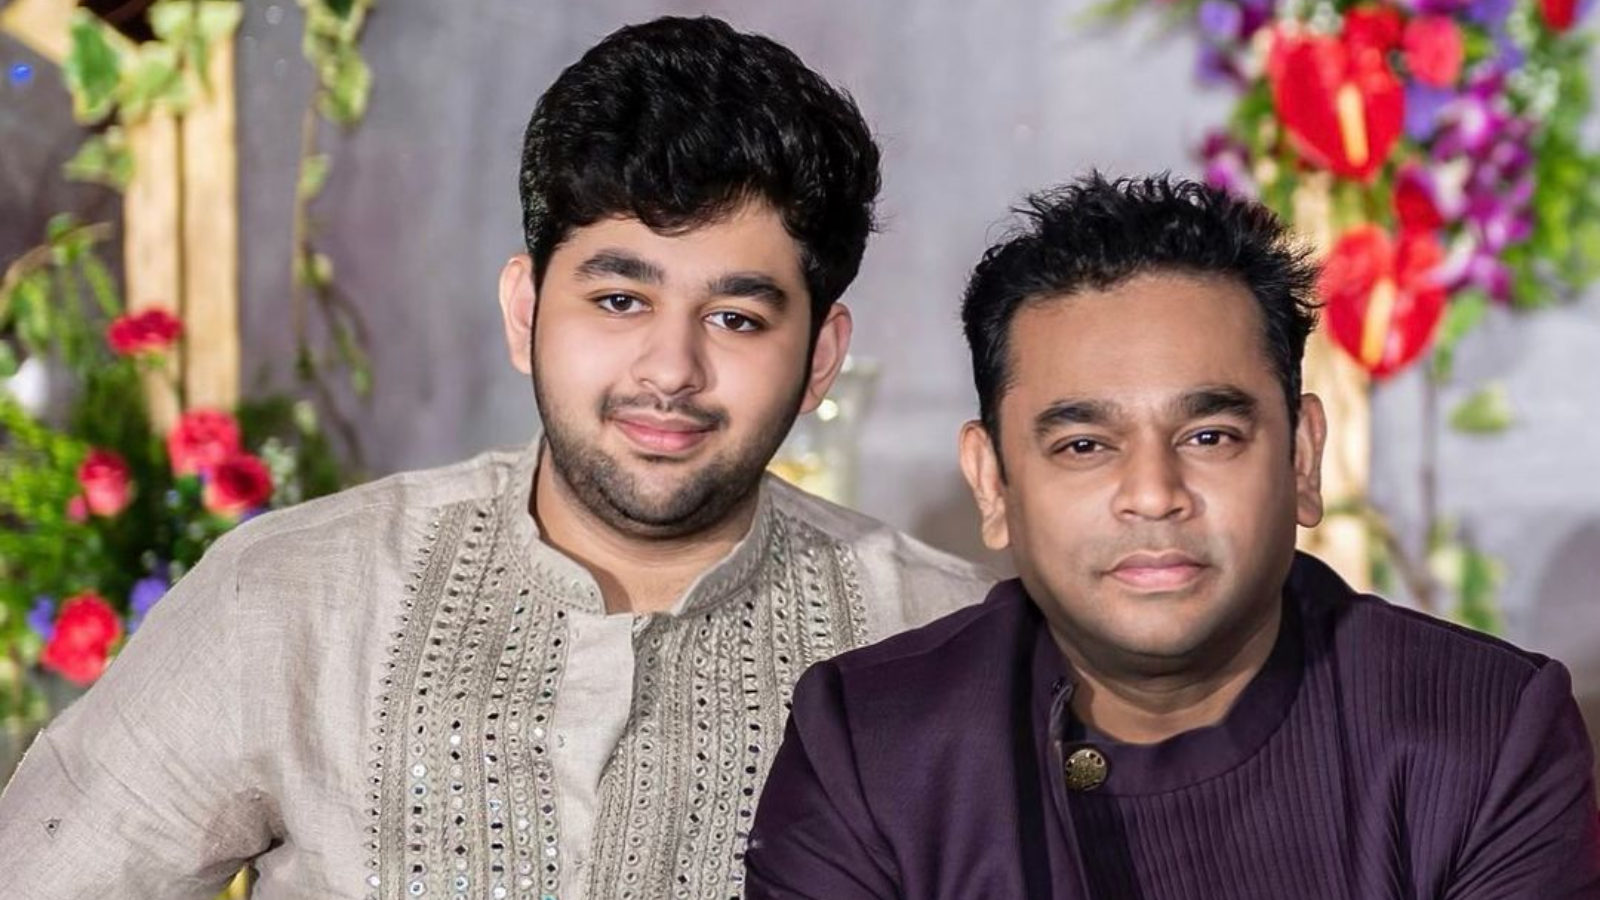 AR Rahman’s son Amin is a large fan of Avengers: Endgame, wished his father in a filmy fashion.